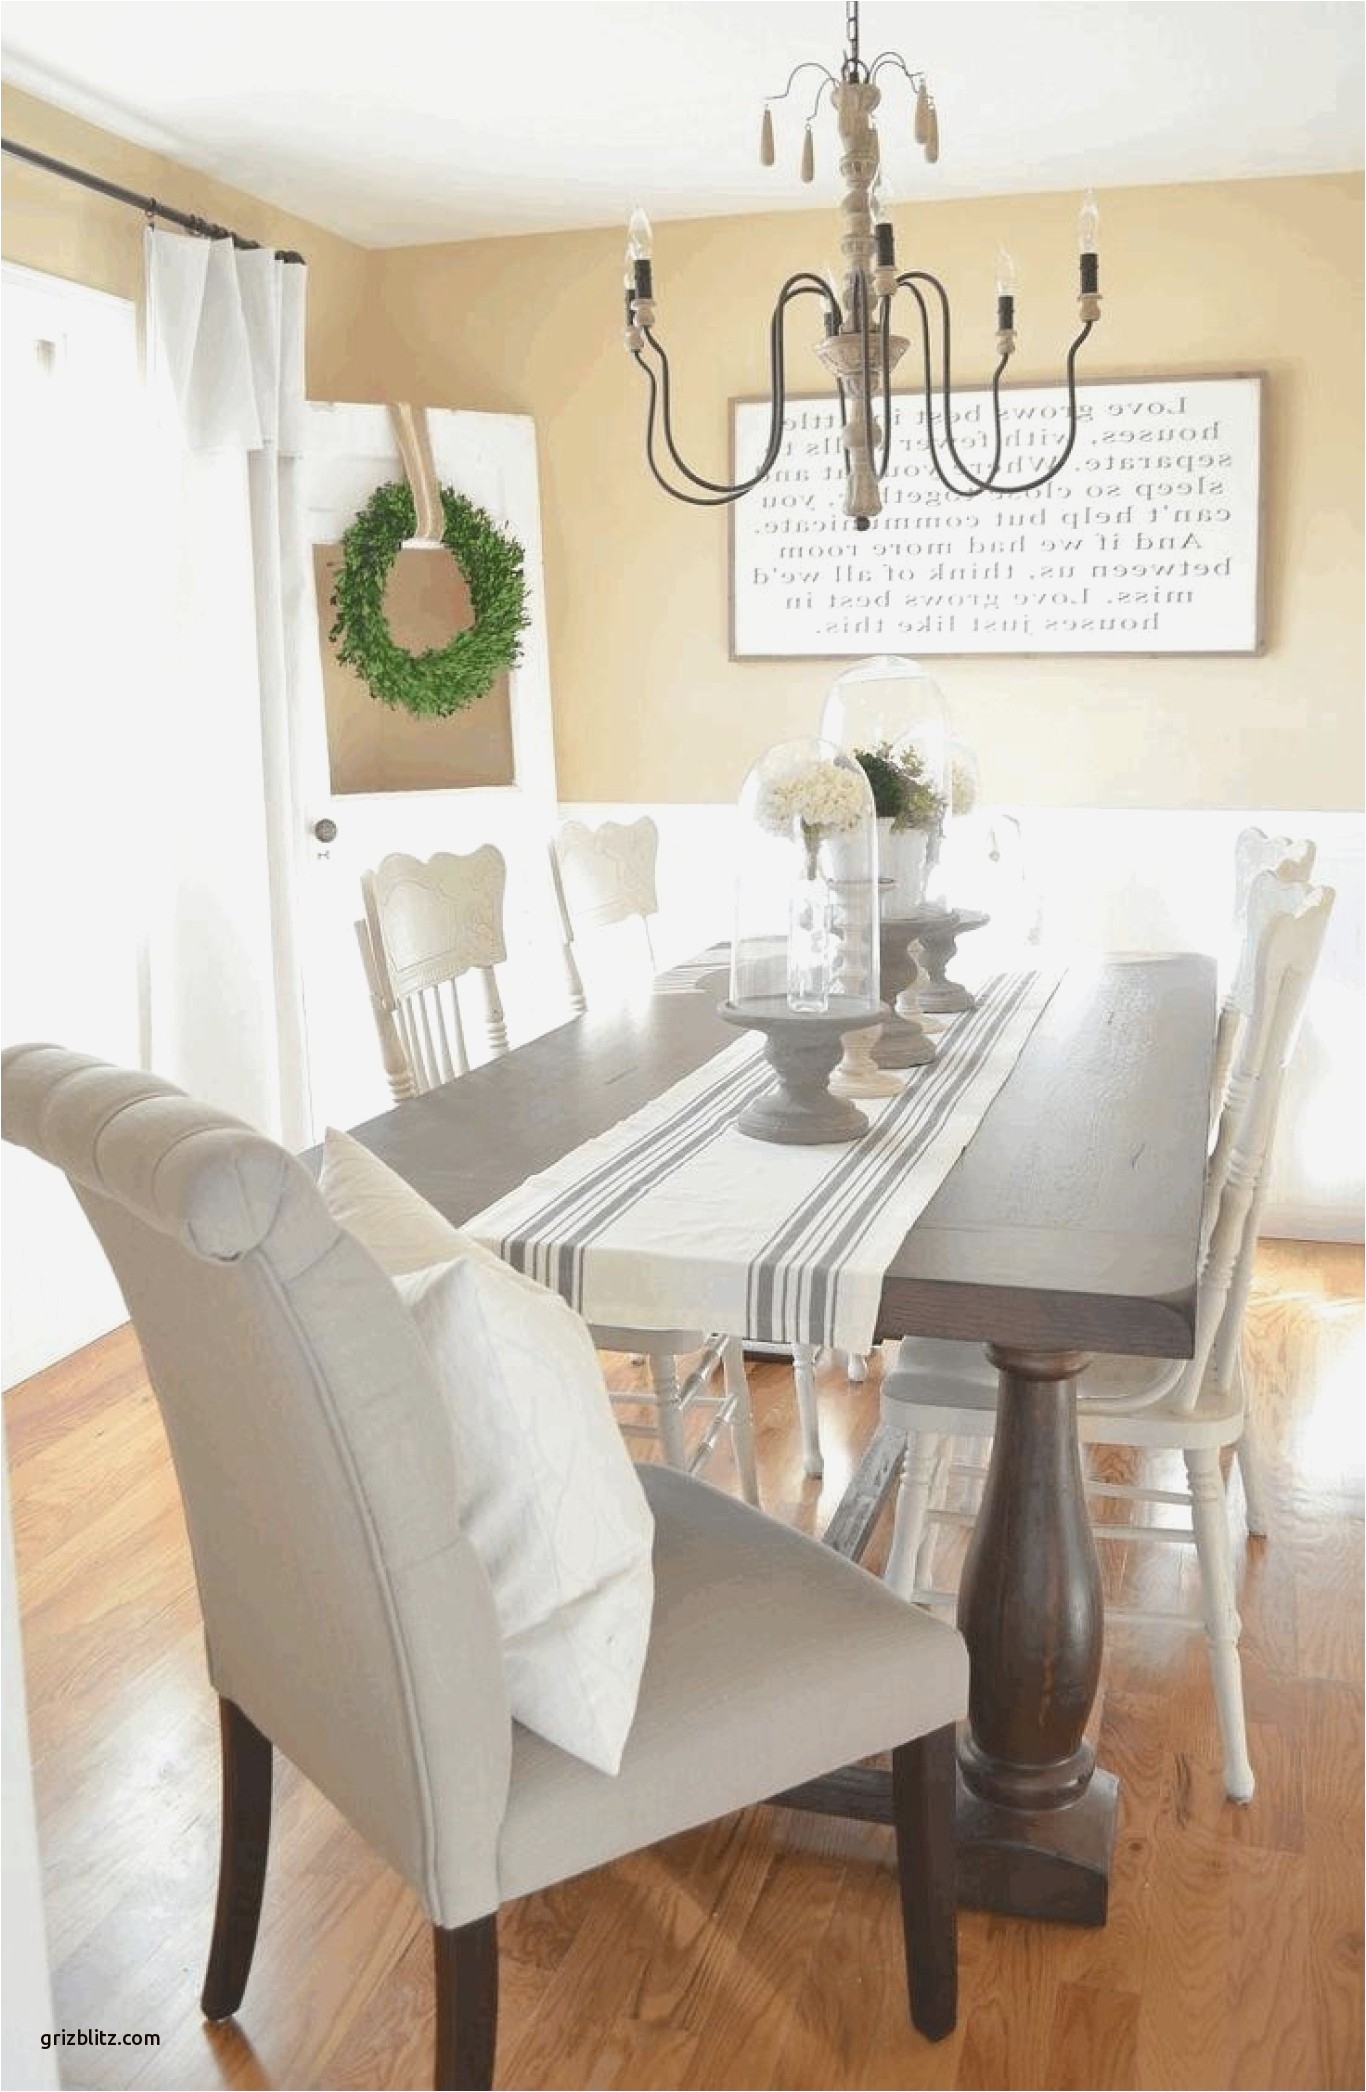 Full Size of Dining Room Set Pierimports Canada Pier e Discount Store Pierwicker Chair Pier Import